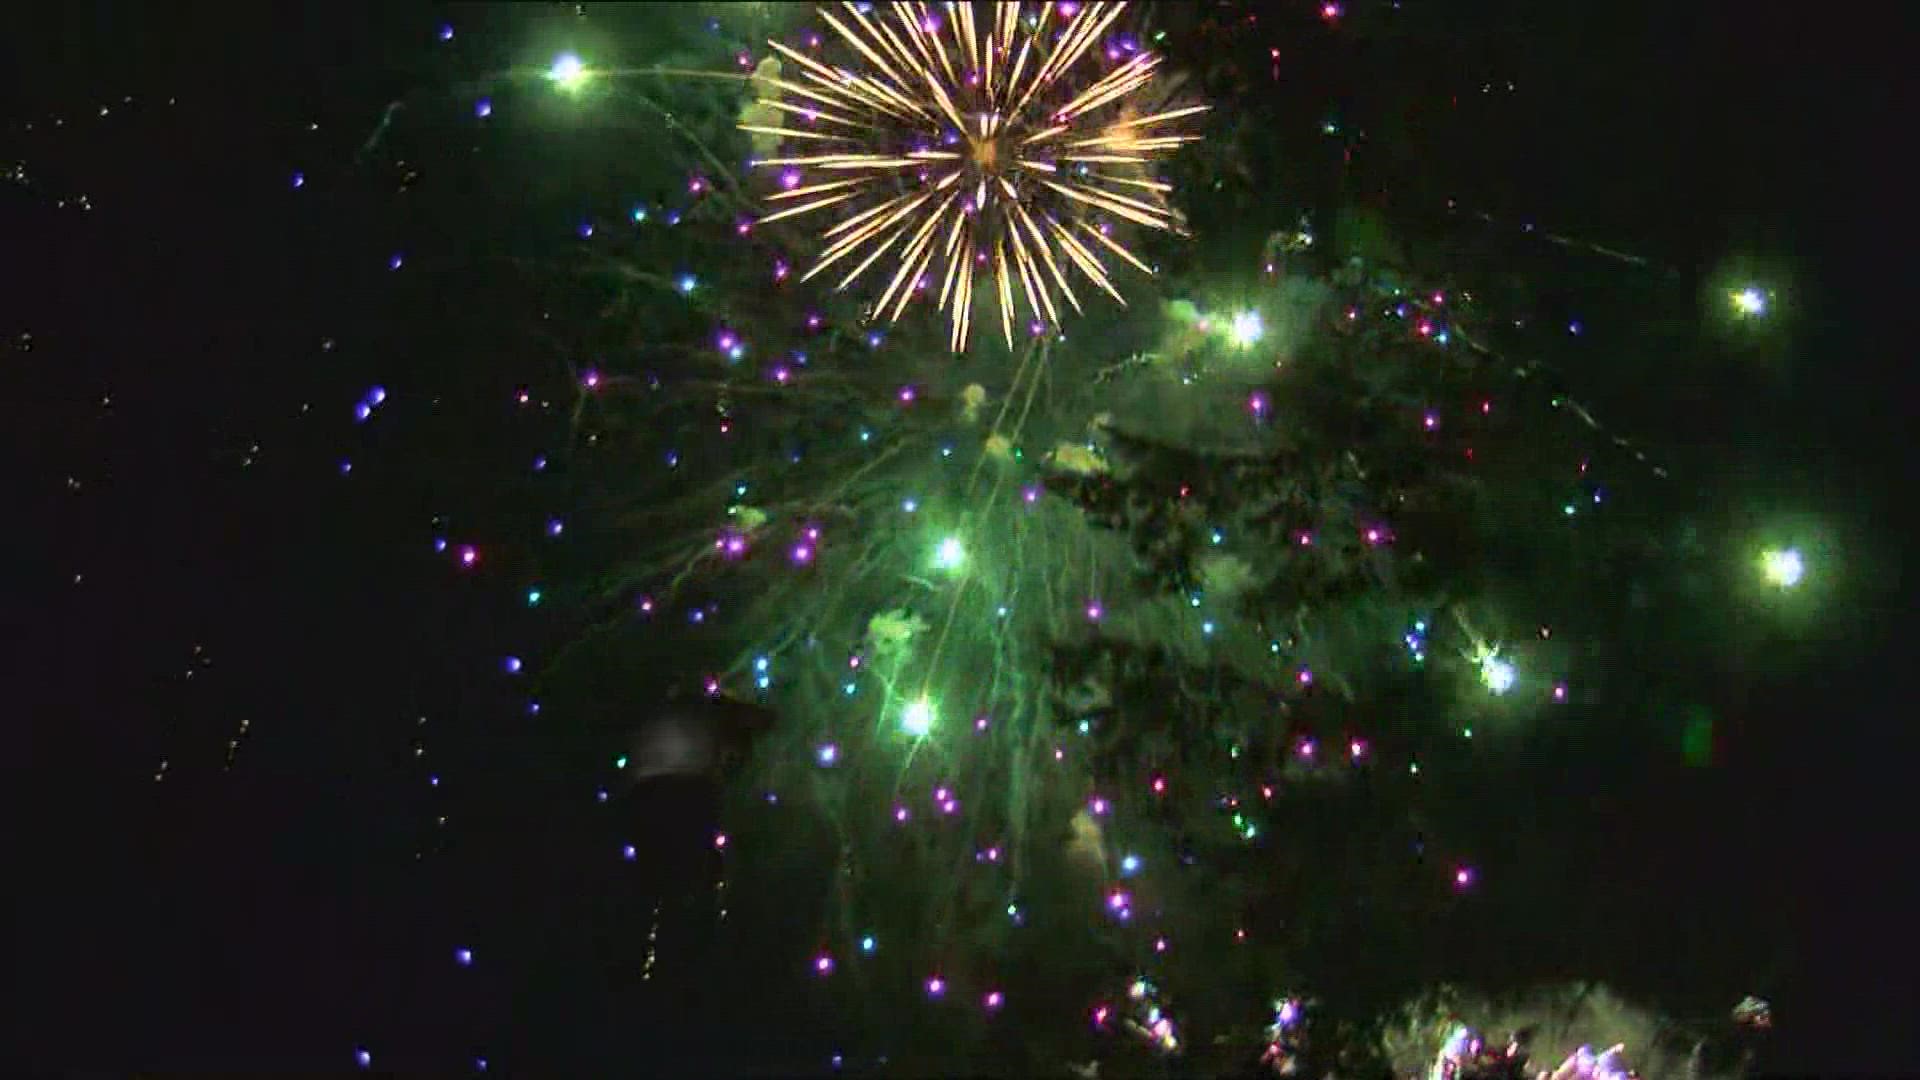 Sylvania celebrated the Fourth of July with usual fanfare but on July 8 instead, after being postponed from the holiday weekend due to lack of fireworks technicians.